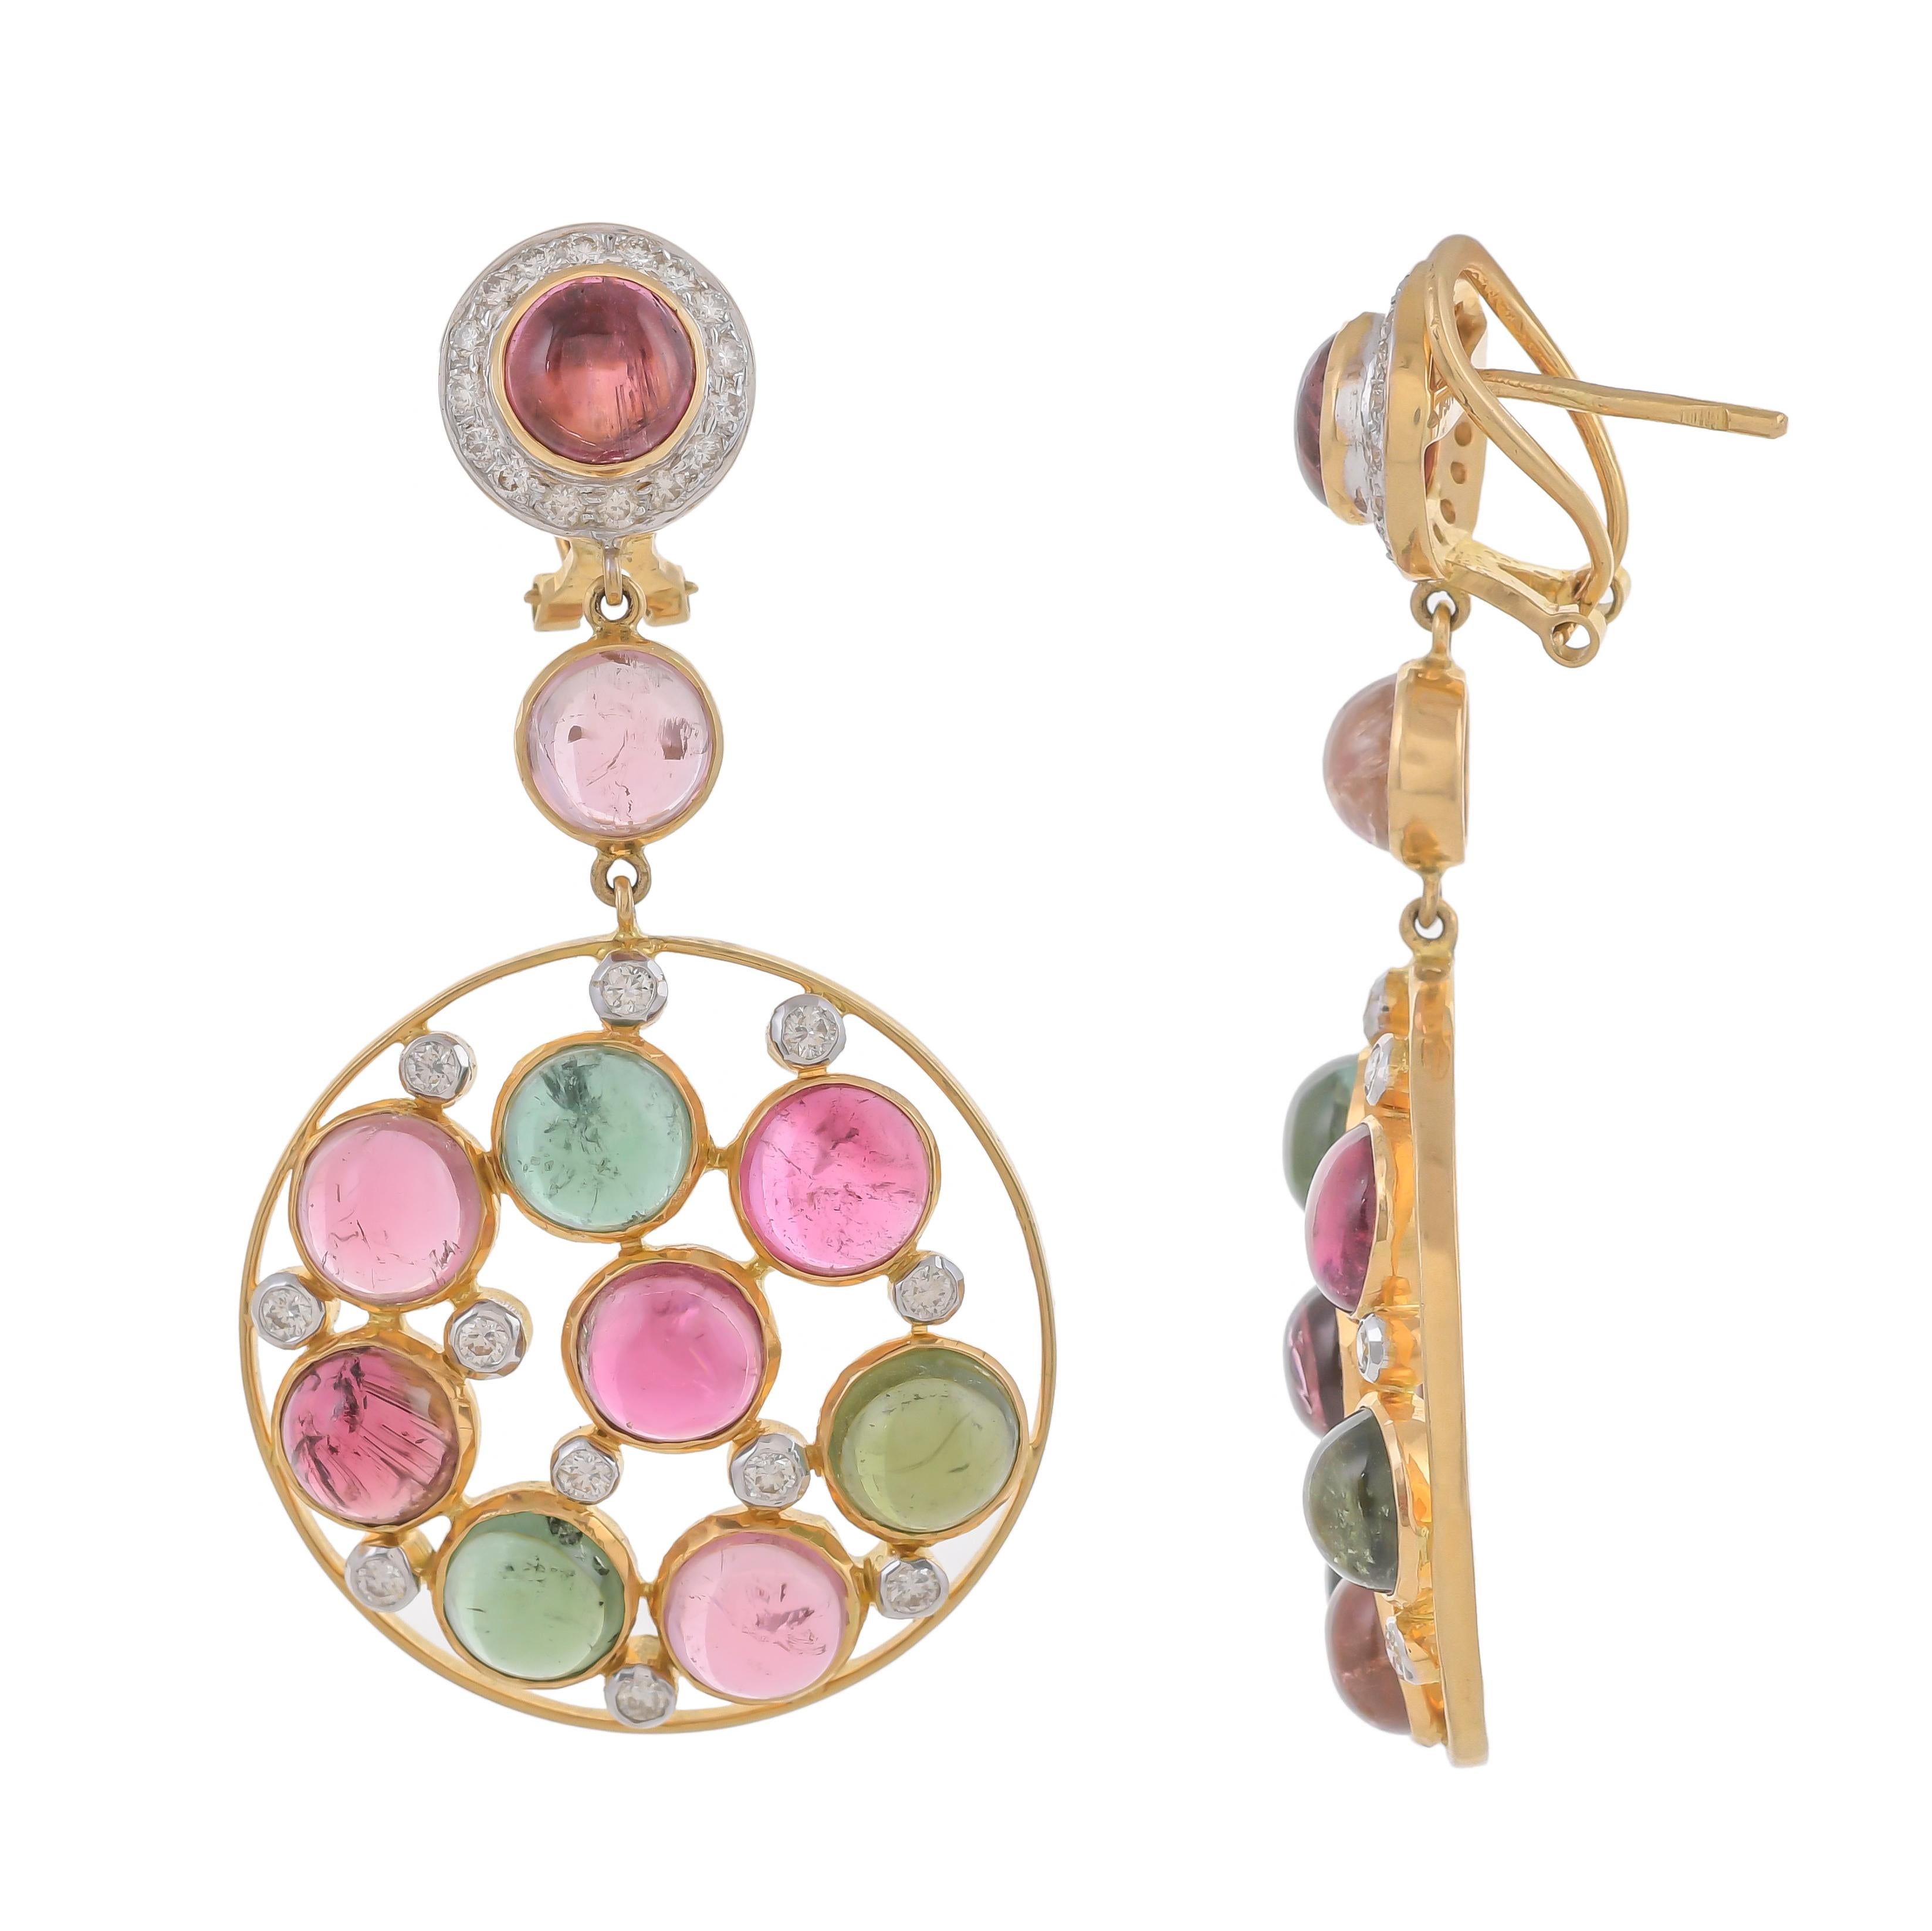 These rigid gold earrings of circular form decorated with 8 round multi-tourmaline alternated with round sparkling white diamonds suspended from a round pink tourmaline cabochon, to a surmount of a round-shaped tourmaline with a diamond set surround